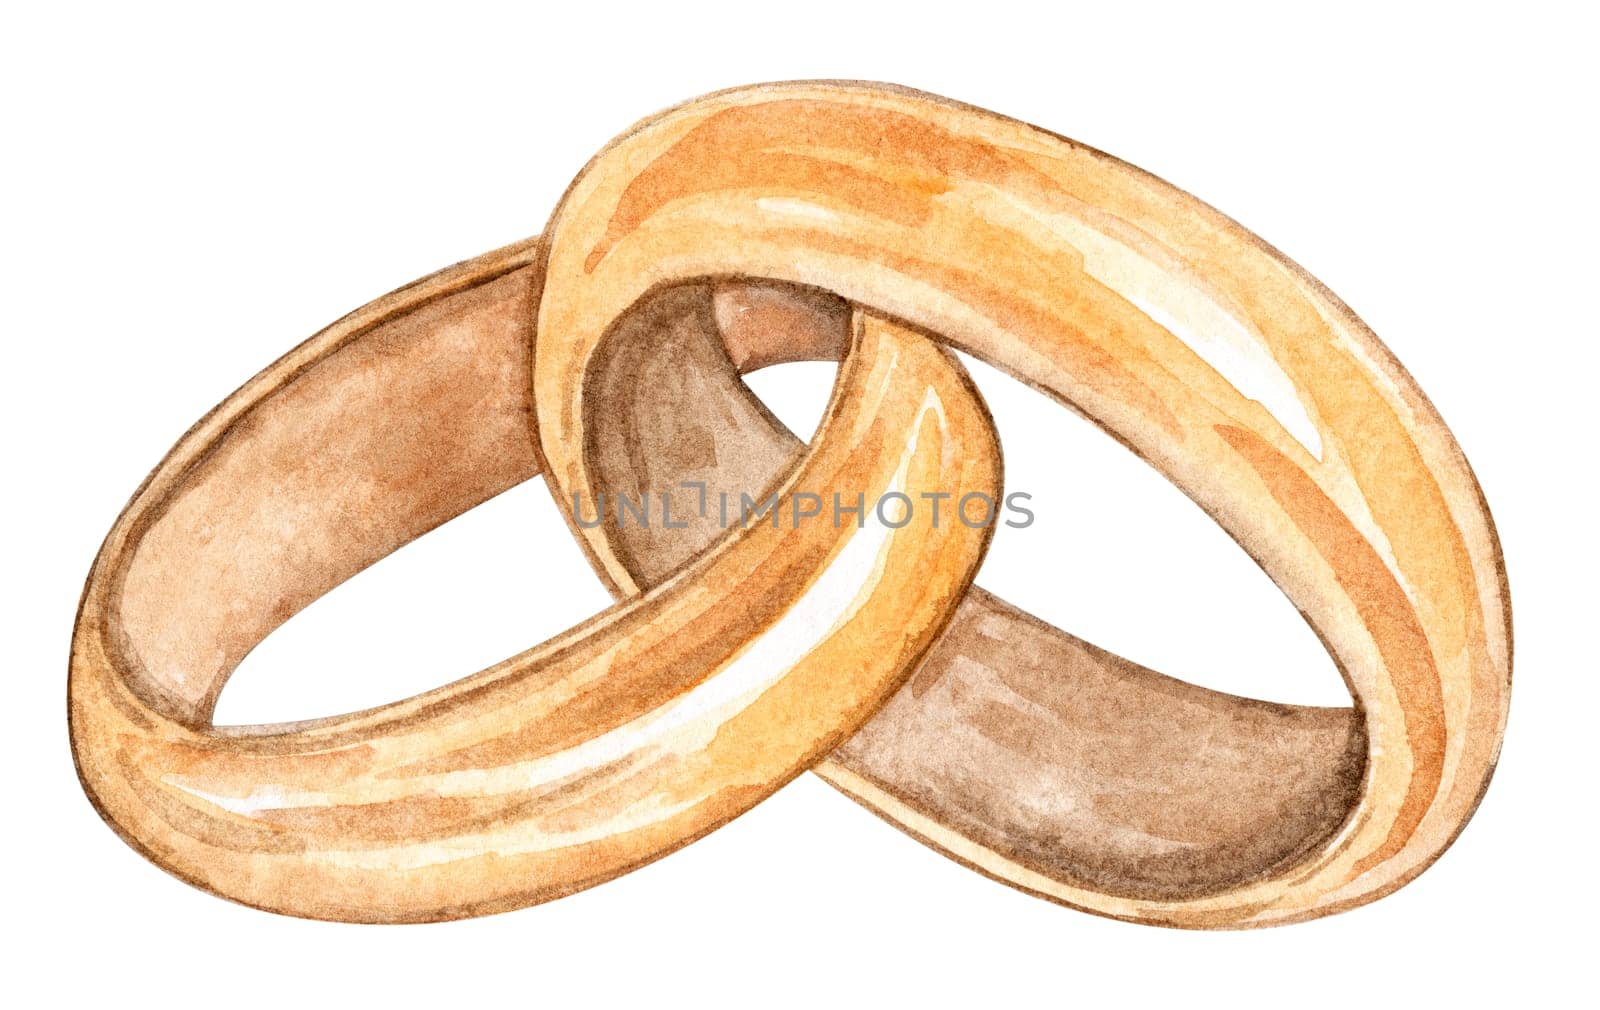 Watercolor wedding rings illustration isolated on white background